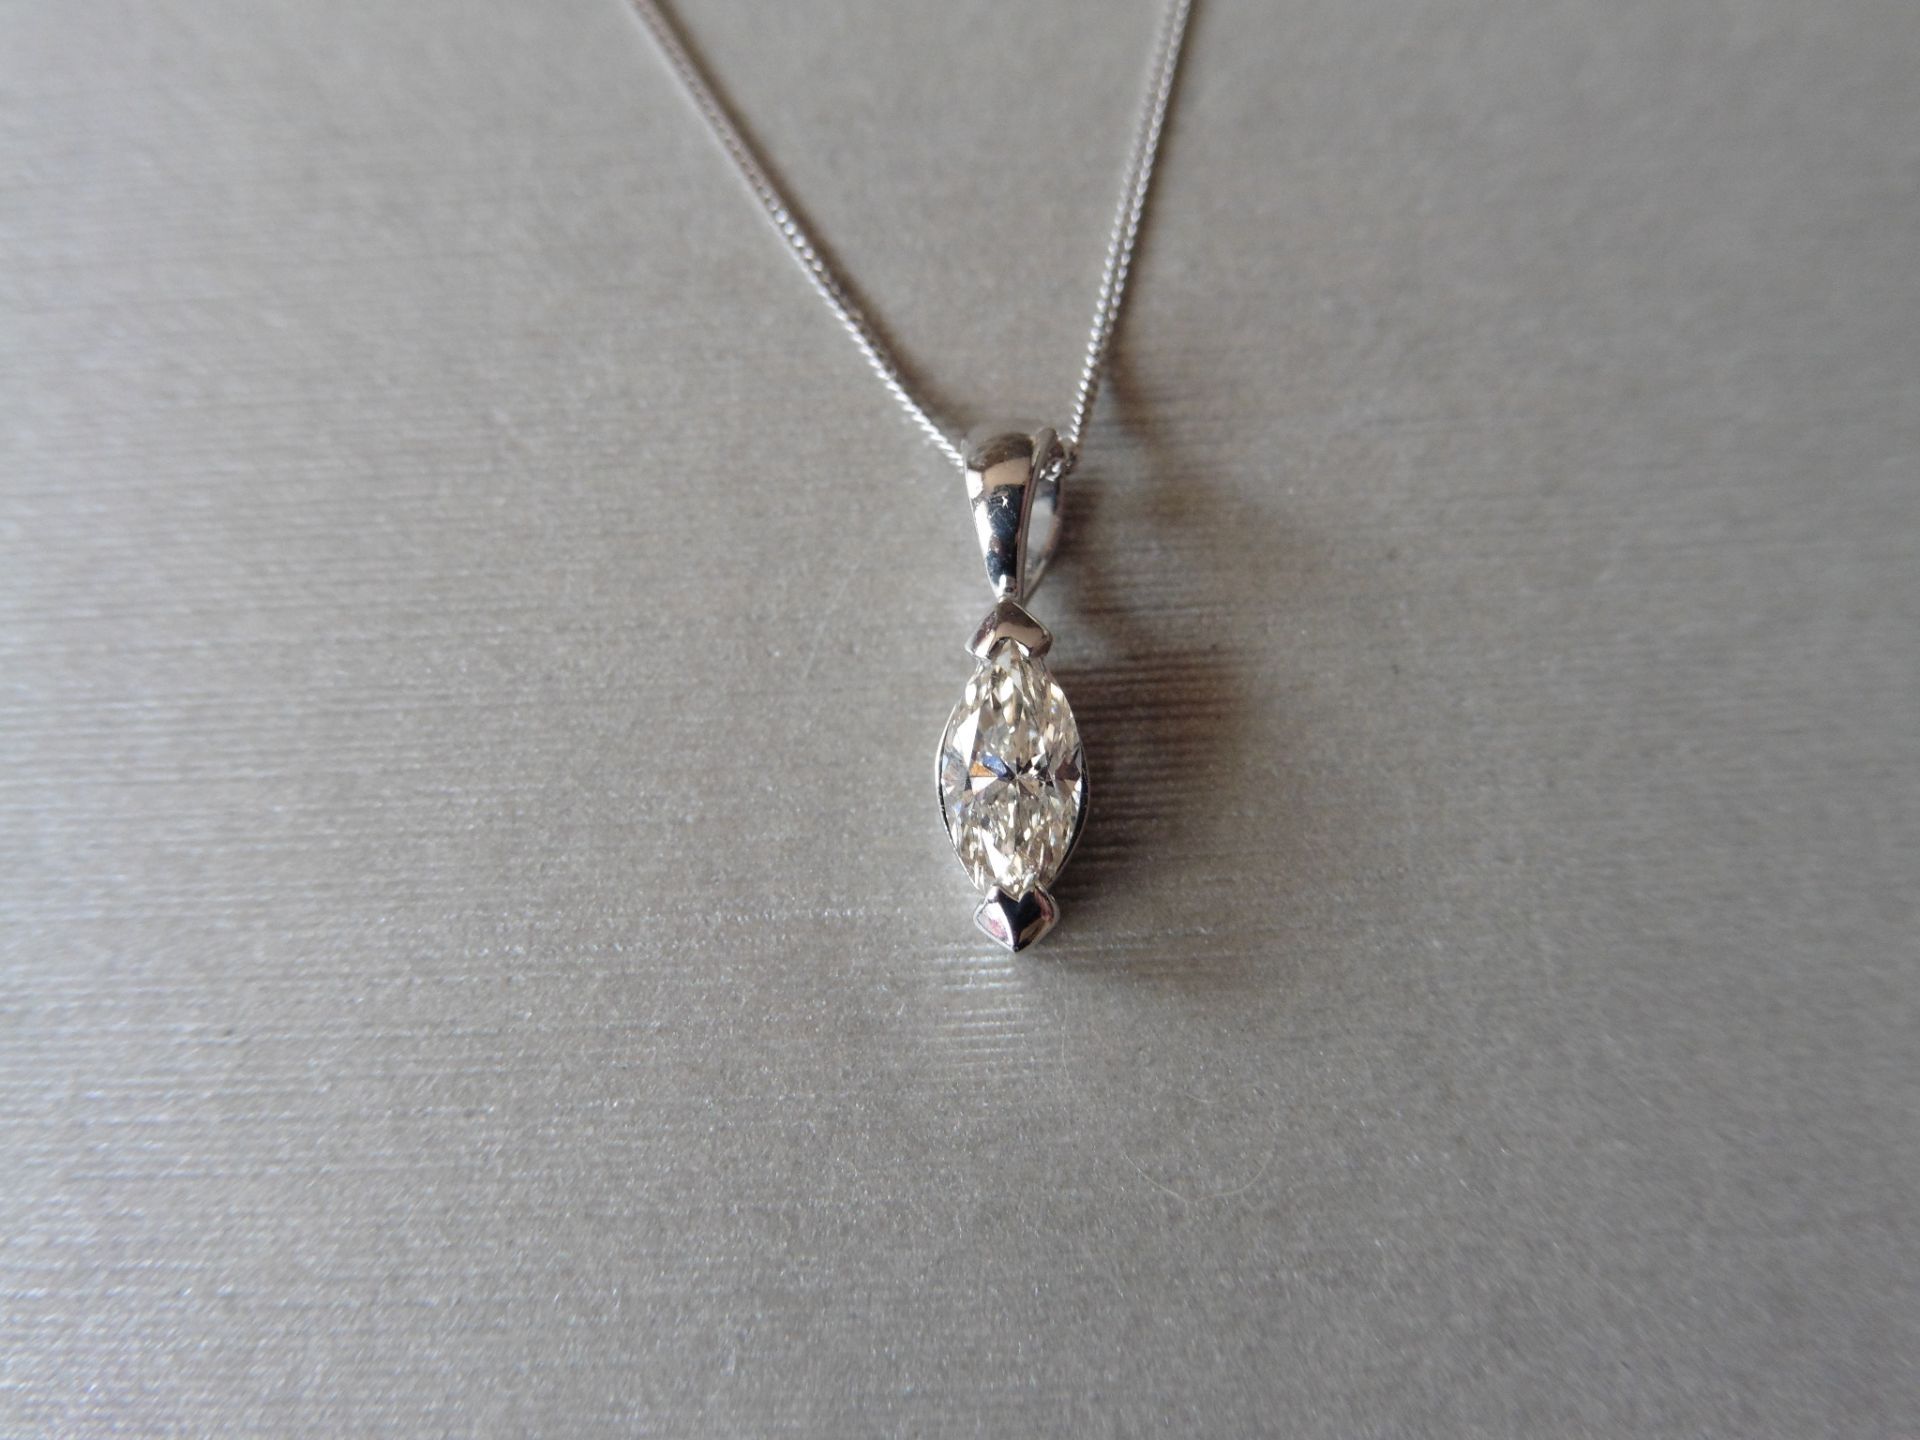 0.70ct diamond solitaire pendant set with a marquise shaped diamond, I colour, VS2 clarity. 2 claw